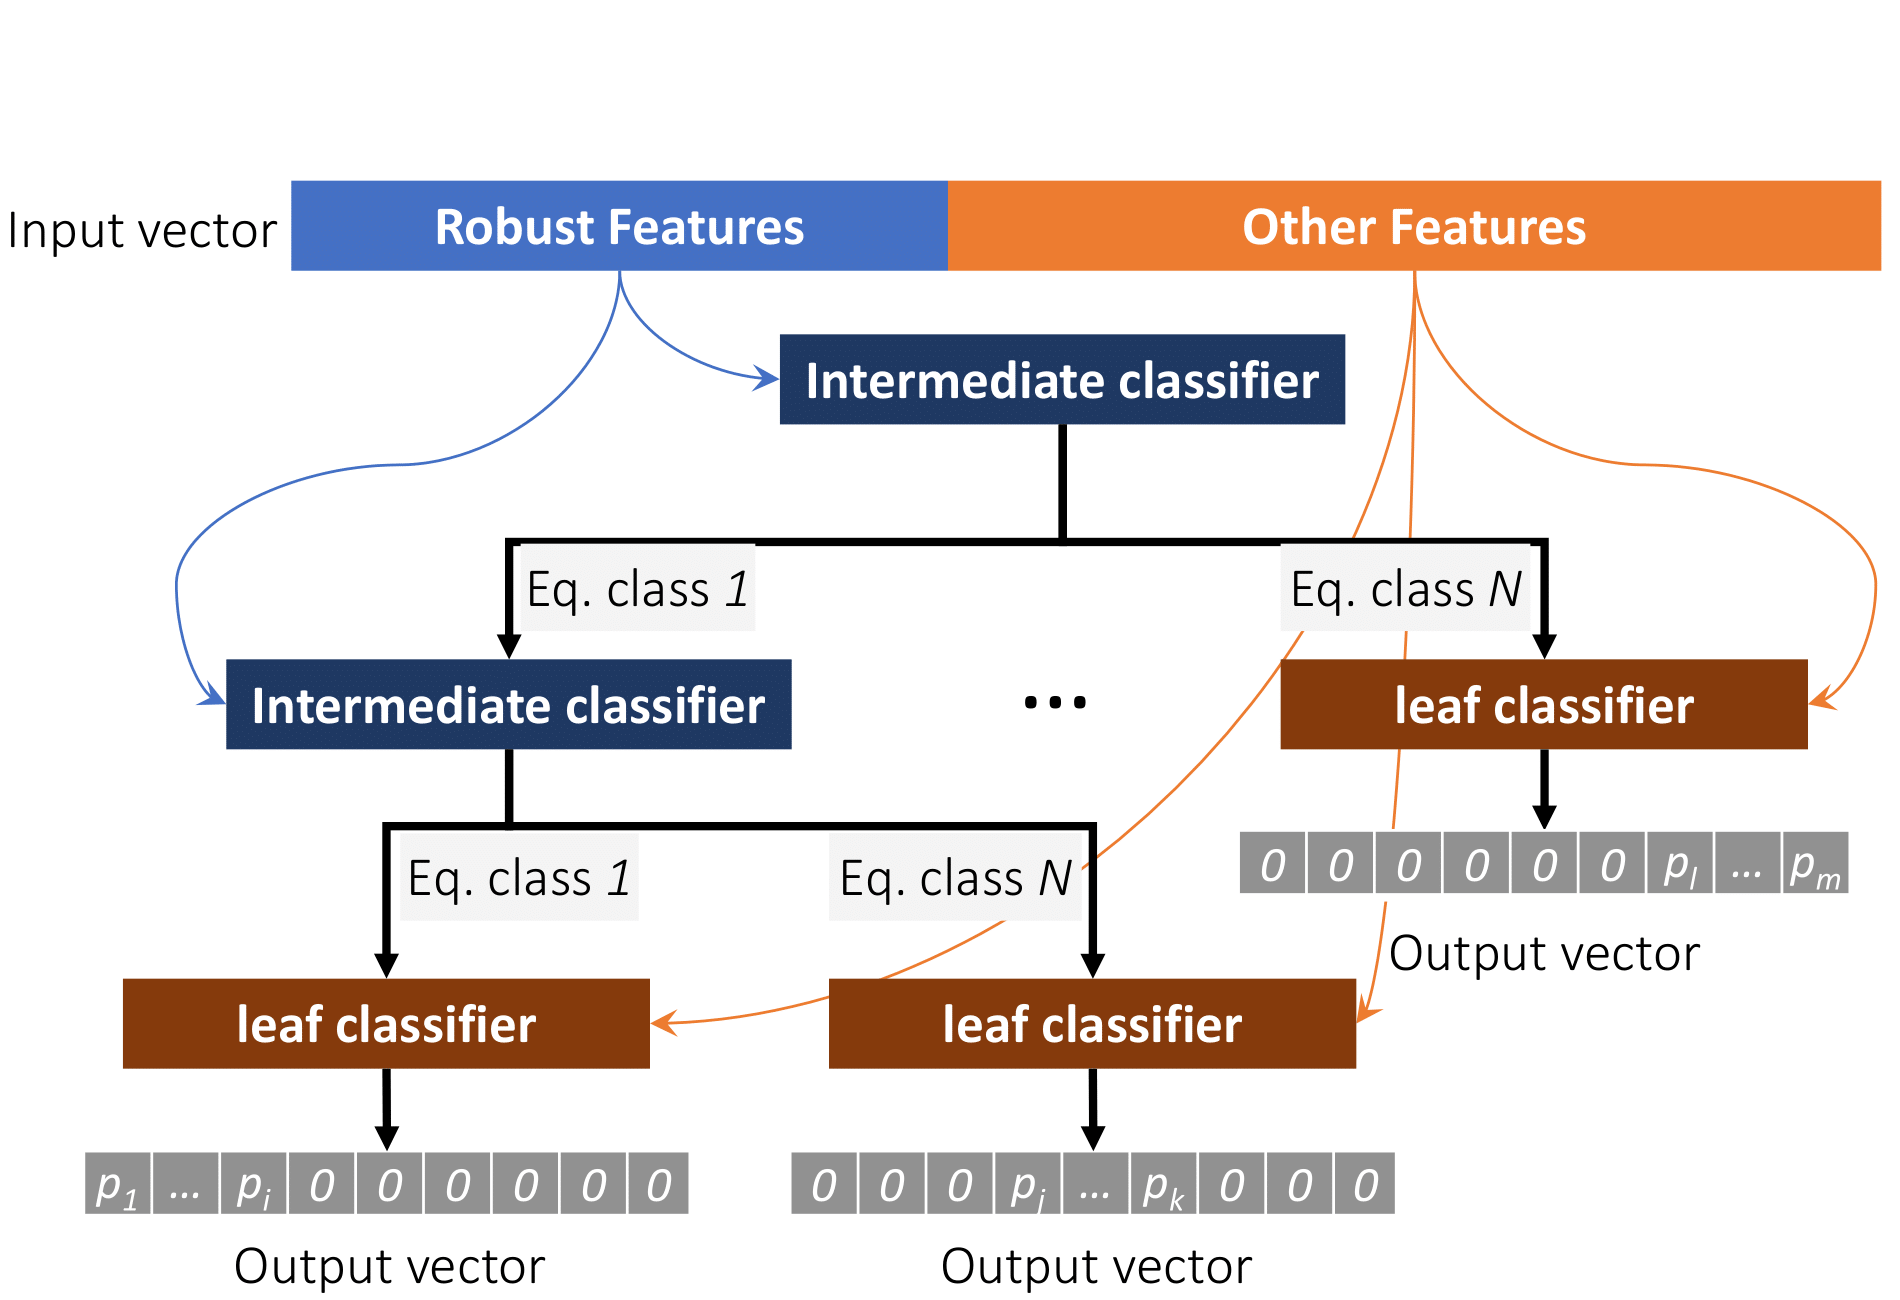 Rearchitecting Classification Frameworks For Increased Robustness